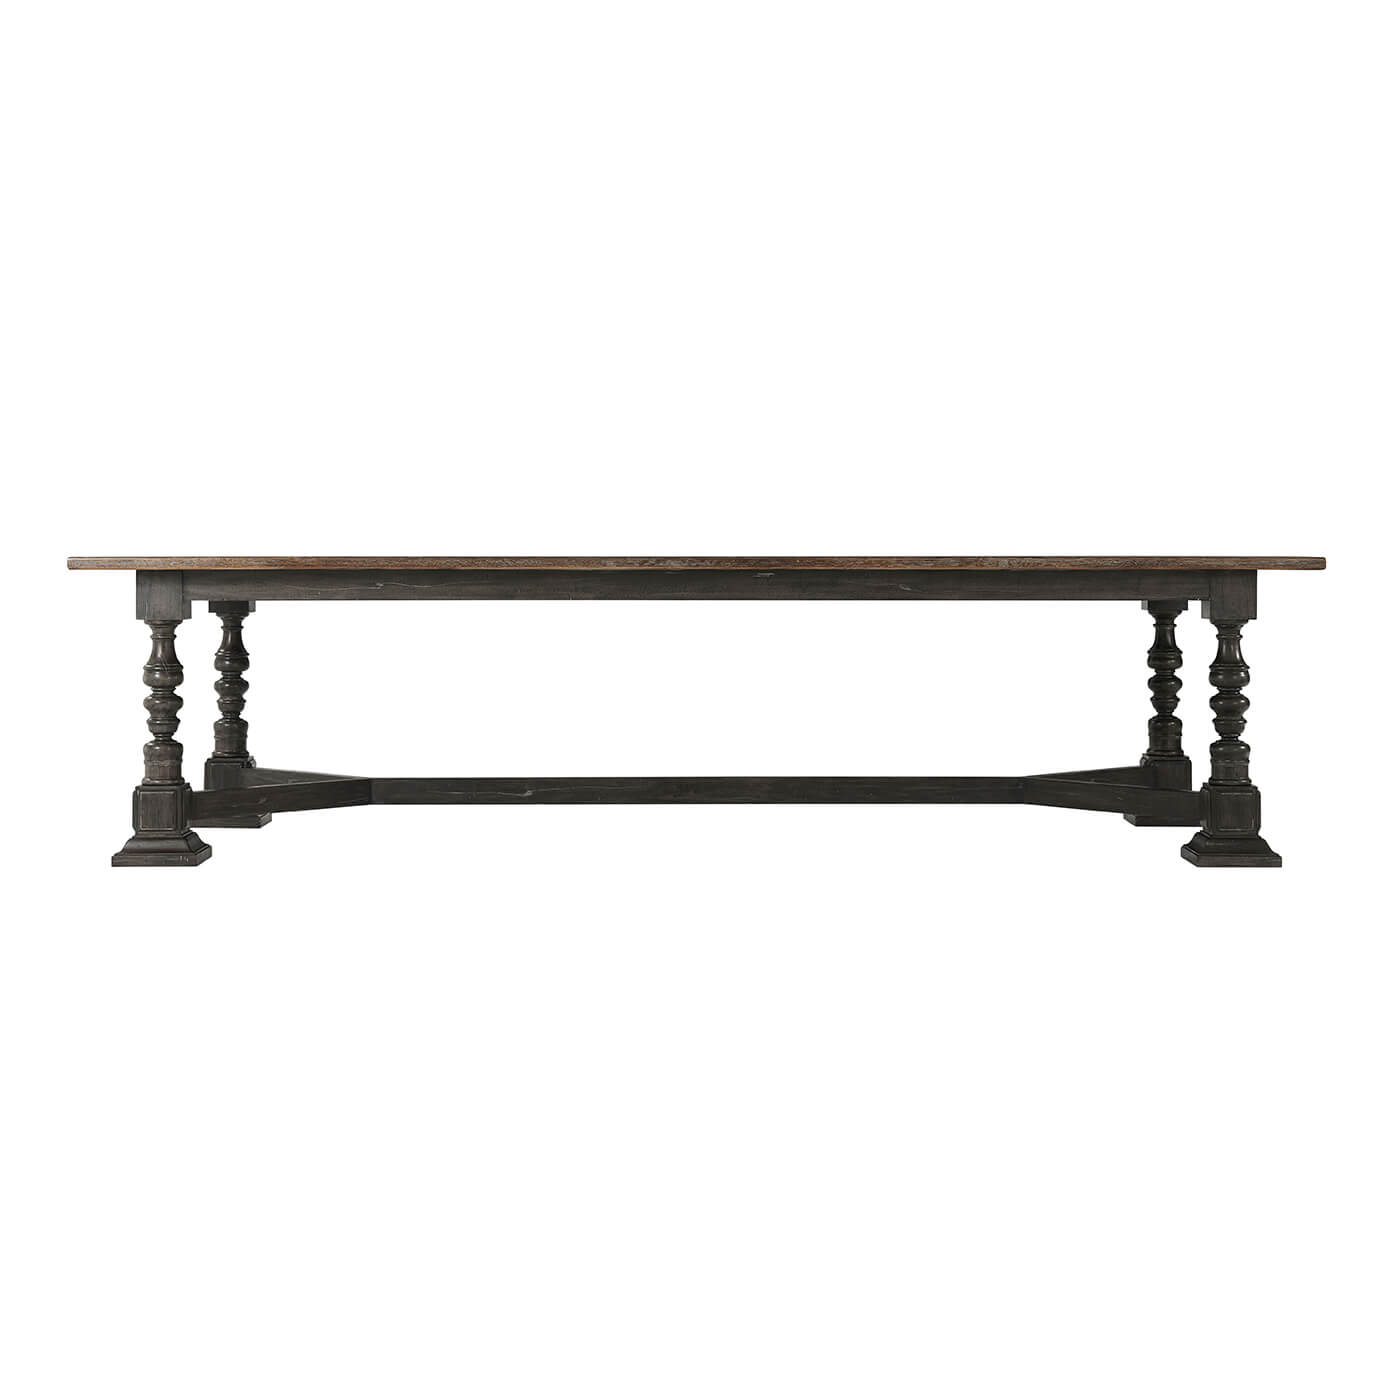 Antique Style French Dining Table - English Georgian America